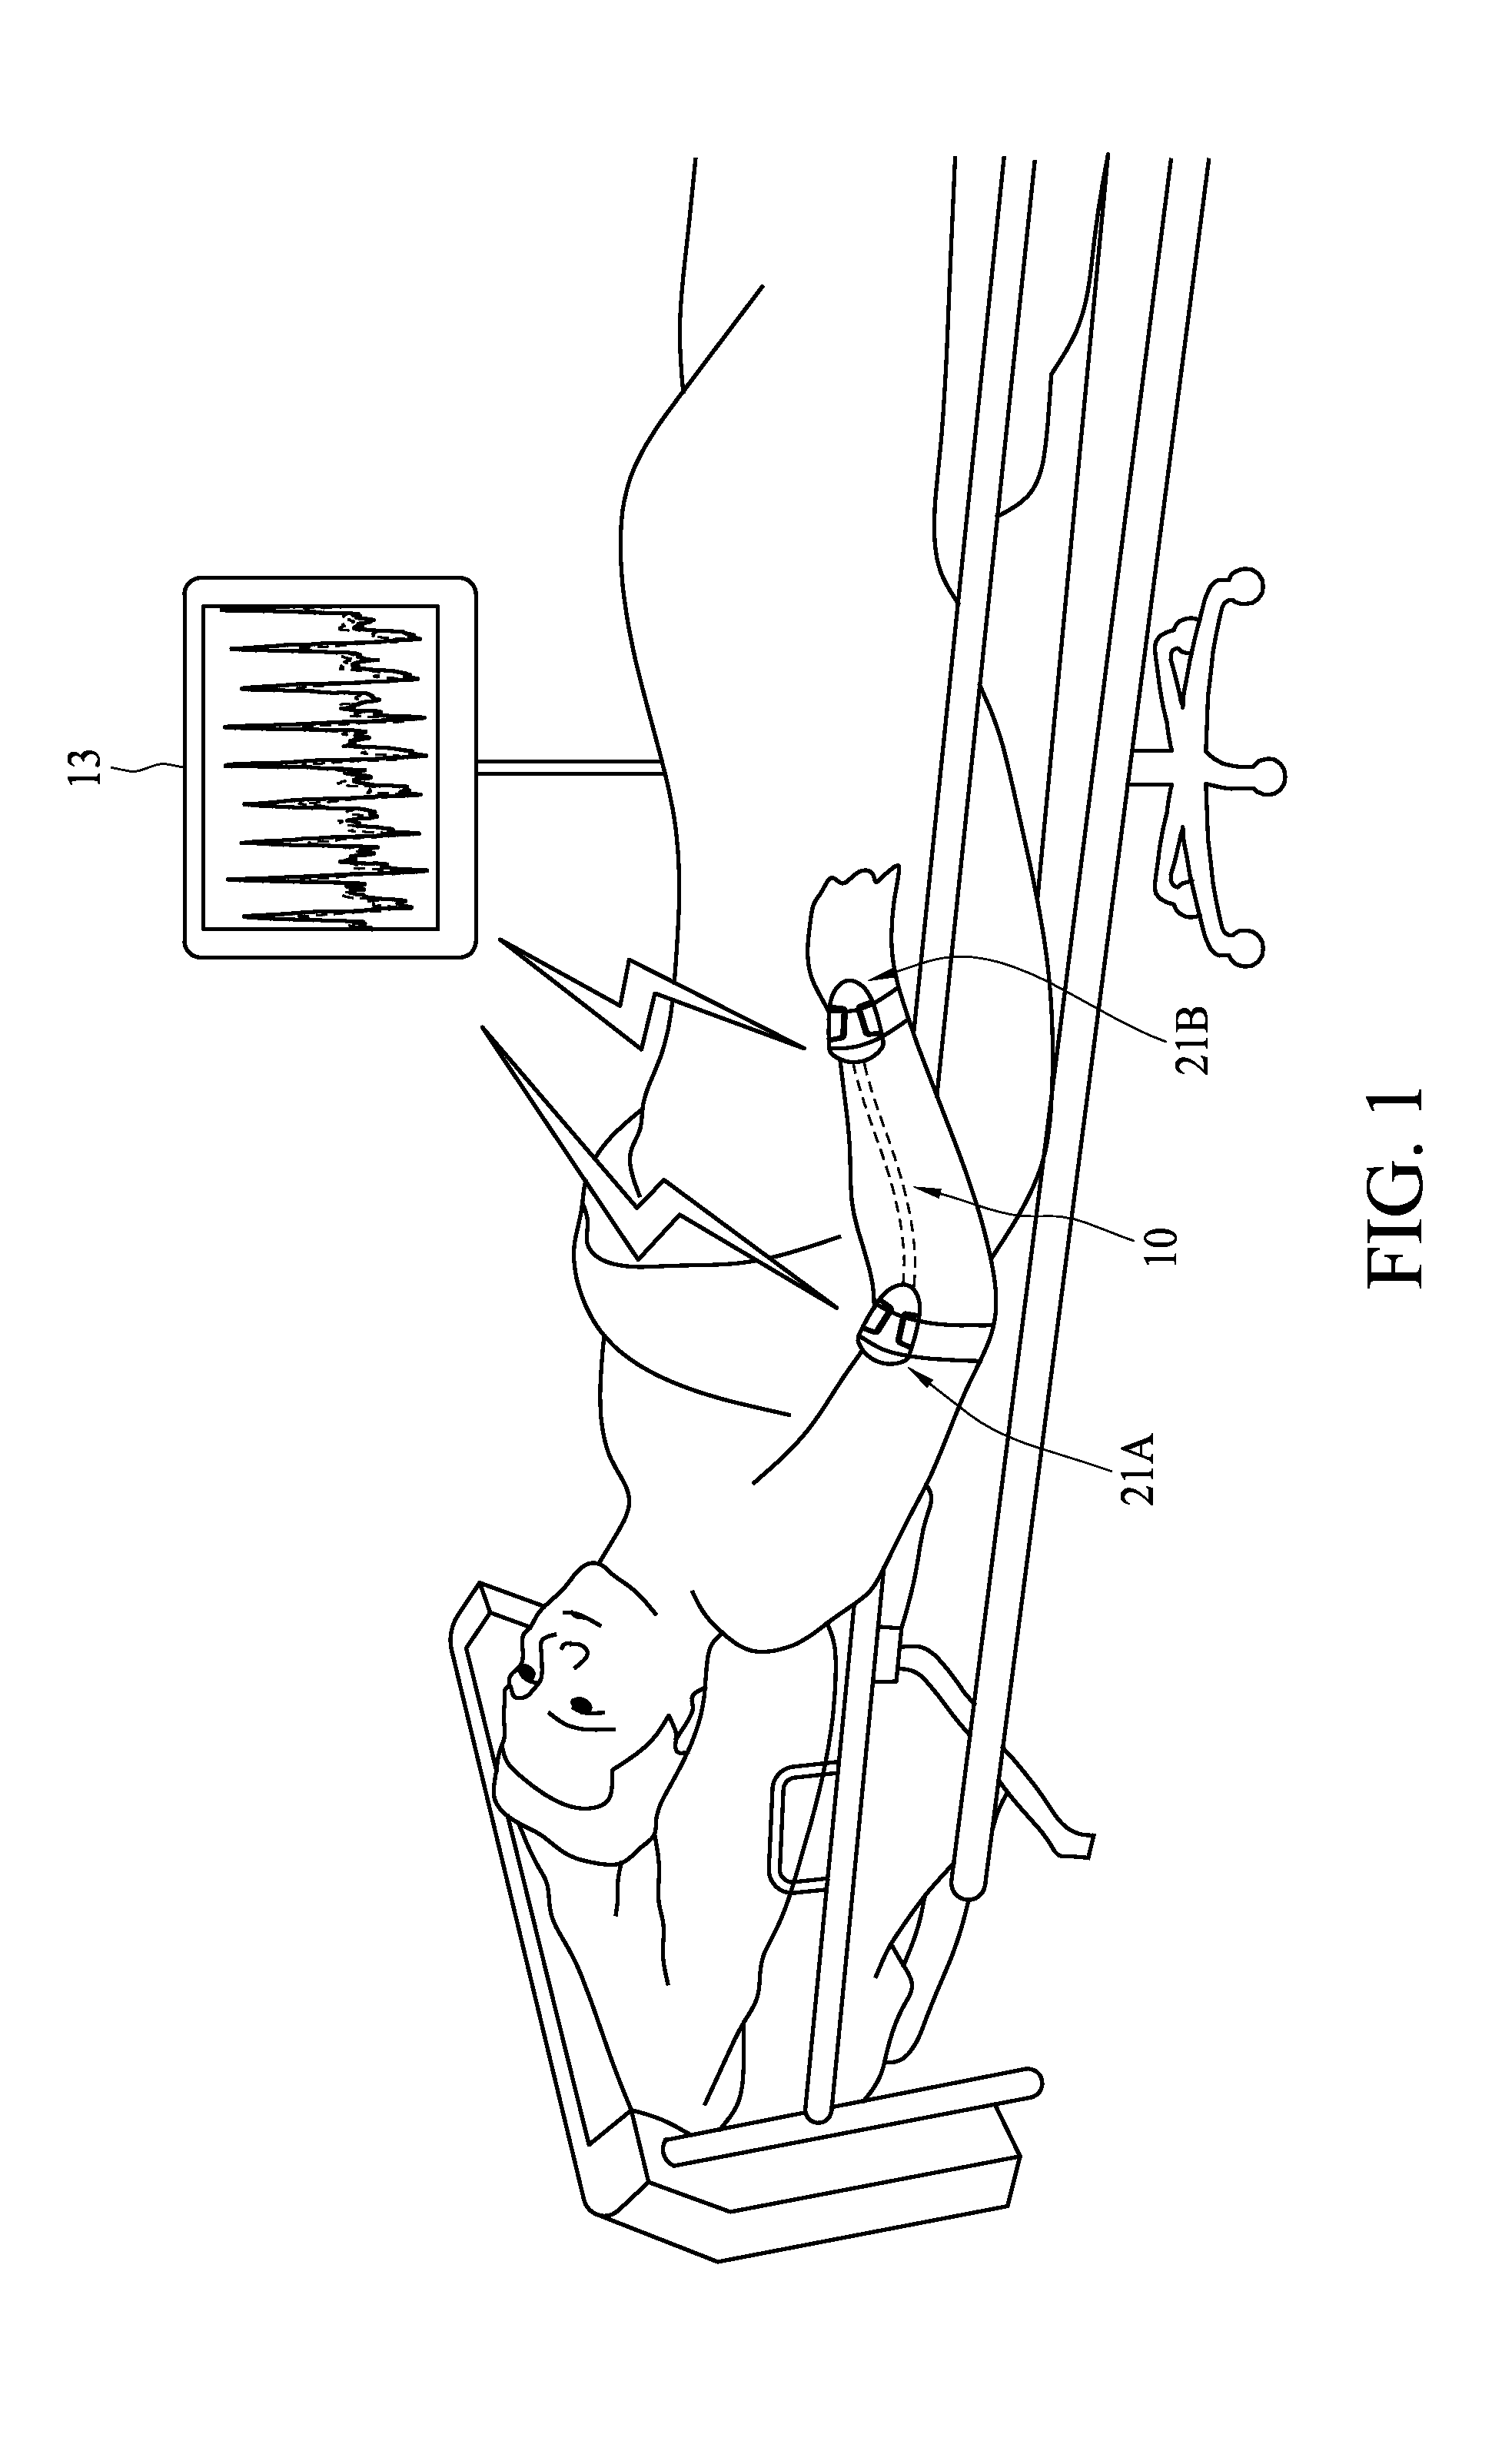 Non-invasive continuous blood pressure monitoring system and method